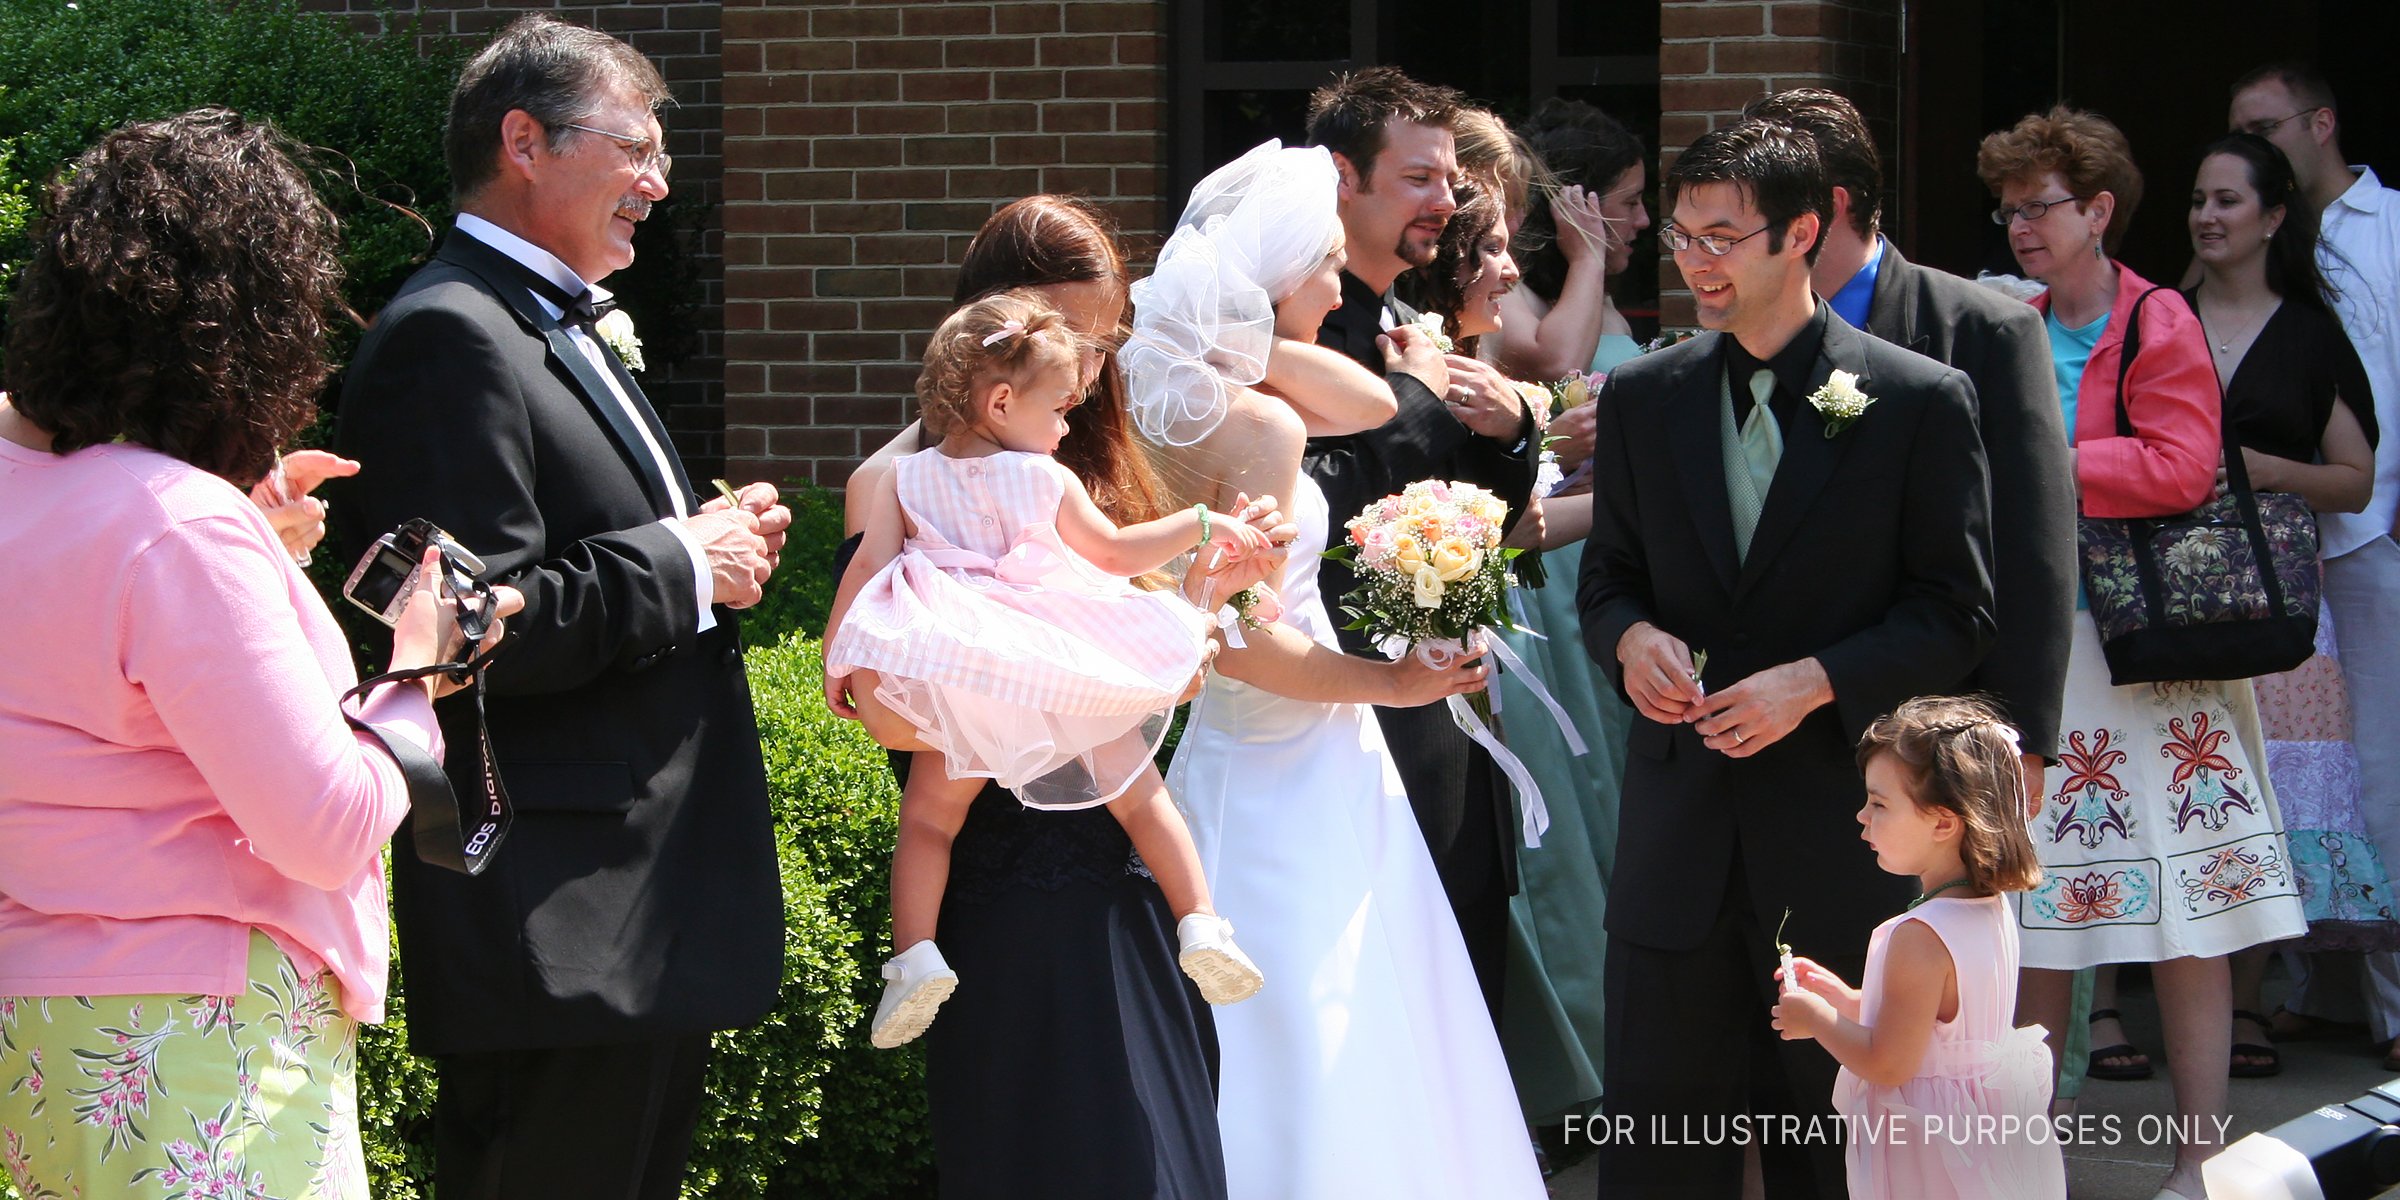 Wedding group standing outside | Source: Flickr / Gavin St. Ours (CC BY 2.0) 